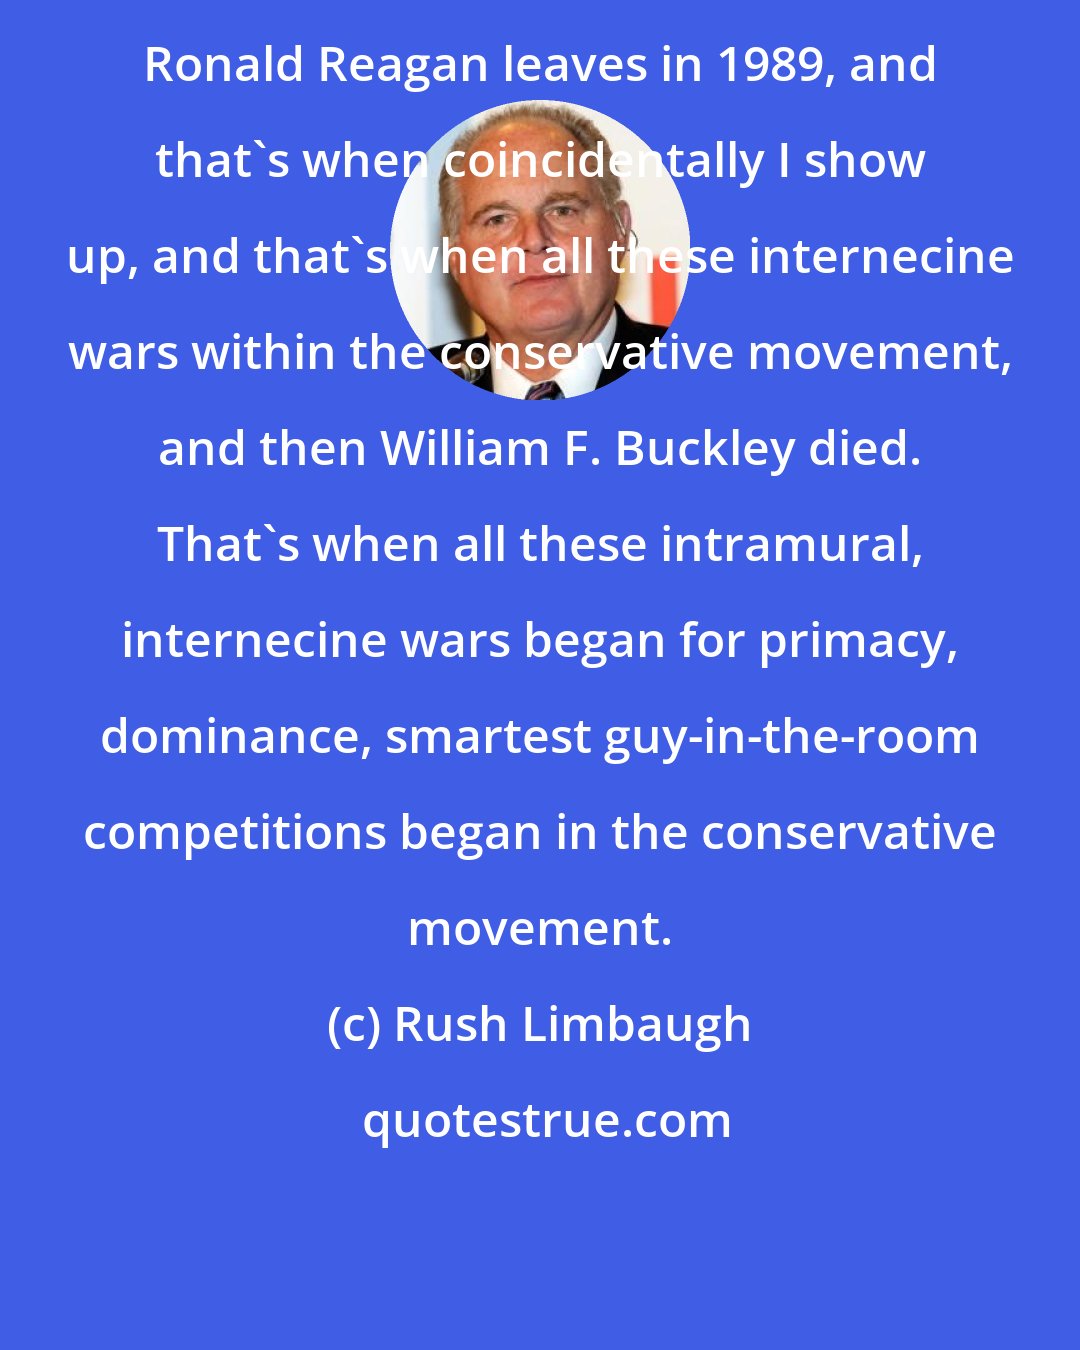 Rush Limbaugh: Ronald Reagan leaves in 1989, and that's when coincidentally I show up, and that's when all these internecine wars within the conservative movement, and then William F. Buckley died. That's when all these intramural, internecine wars began for primacy, dominance, smartest guy-in-the-room competitions began in the conservative movement.